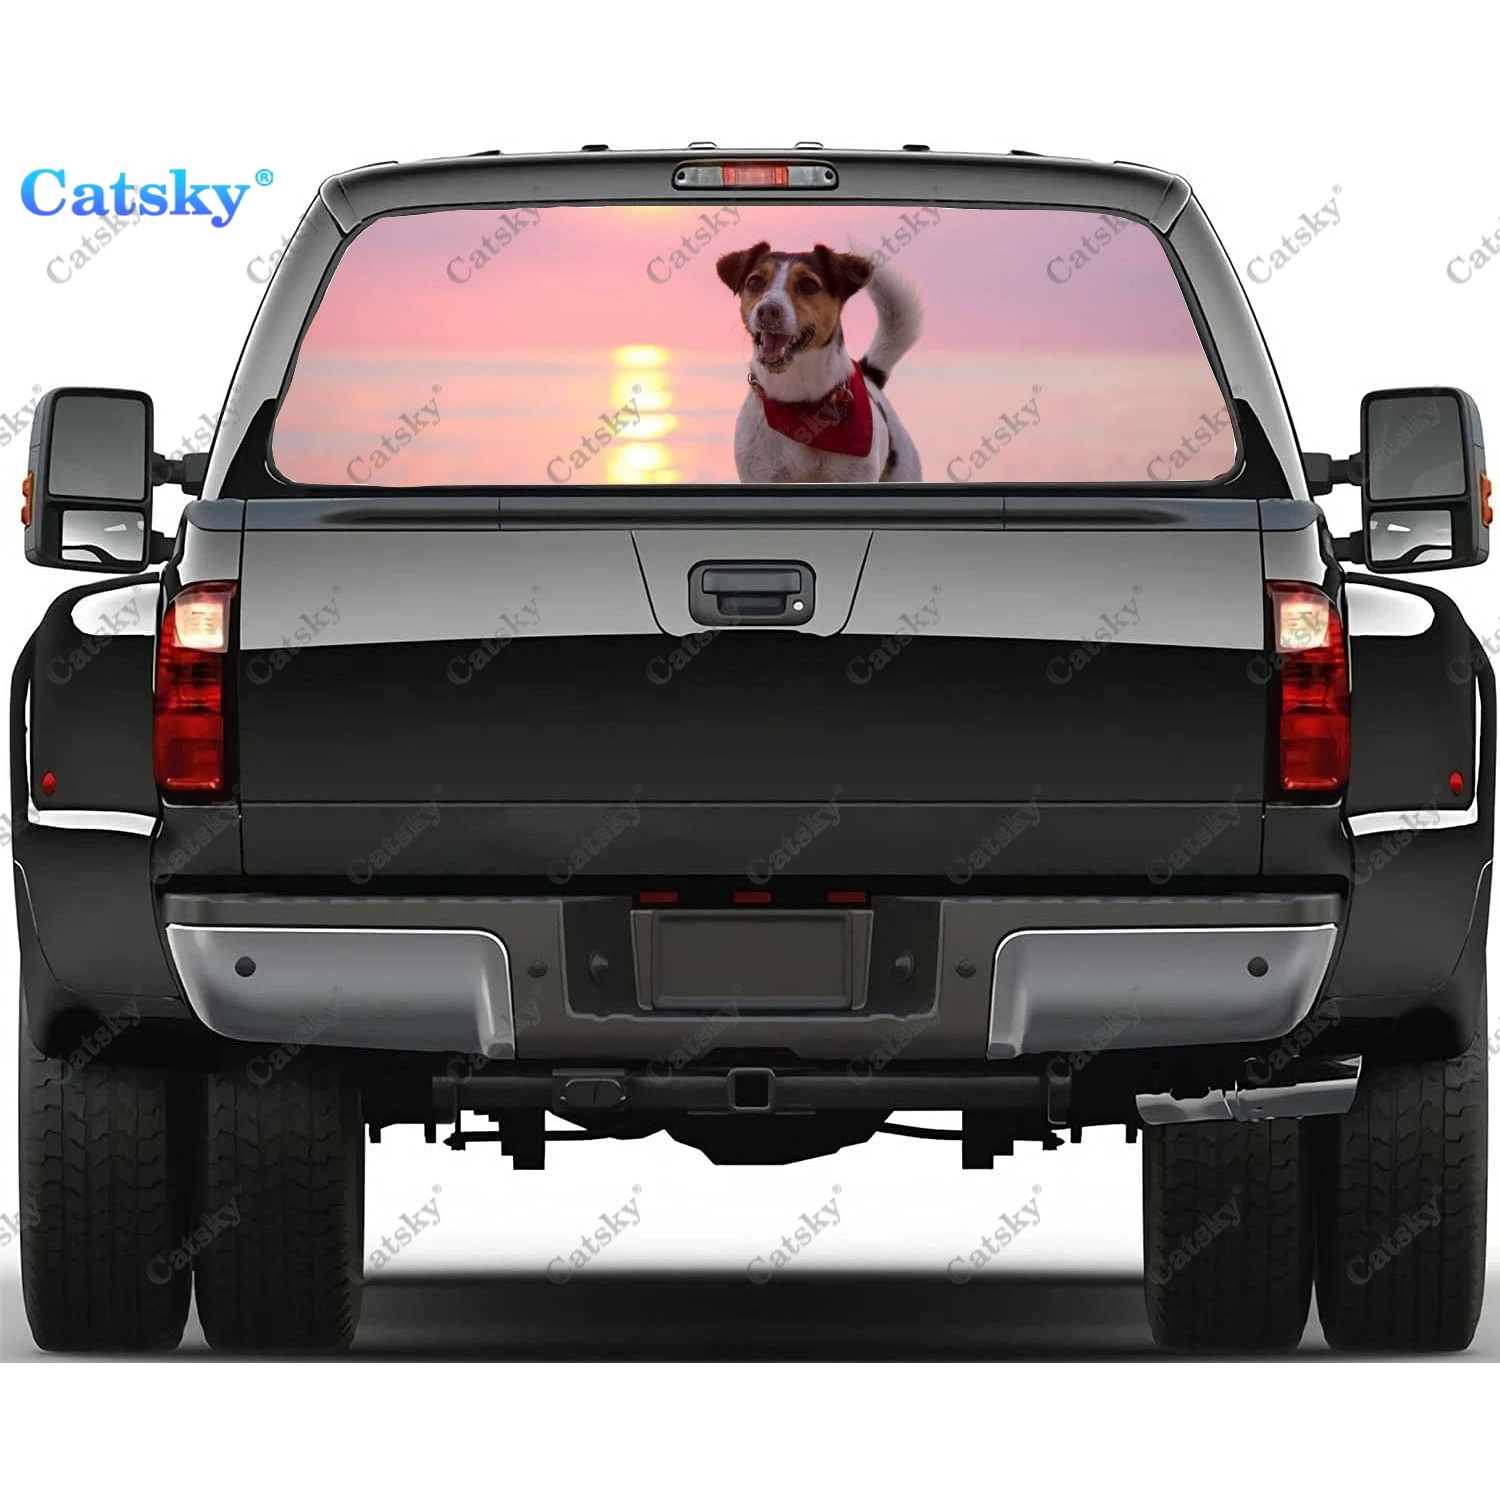 

Jack Russell Terrier Printing Rear Window Stickers Windshield Decal Truck Rear Window Decal Universal Perforated Vinyl Graphic